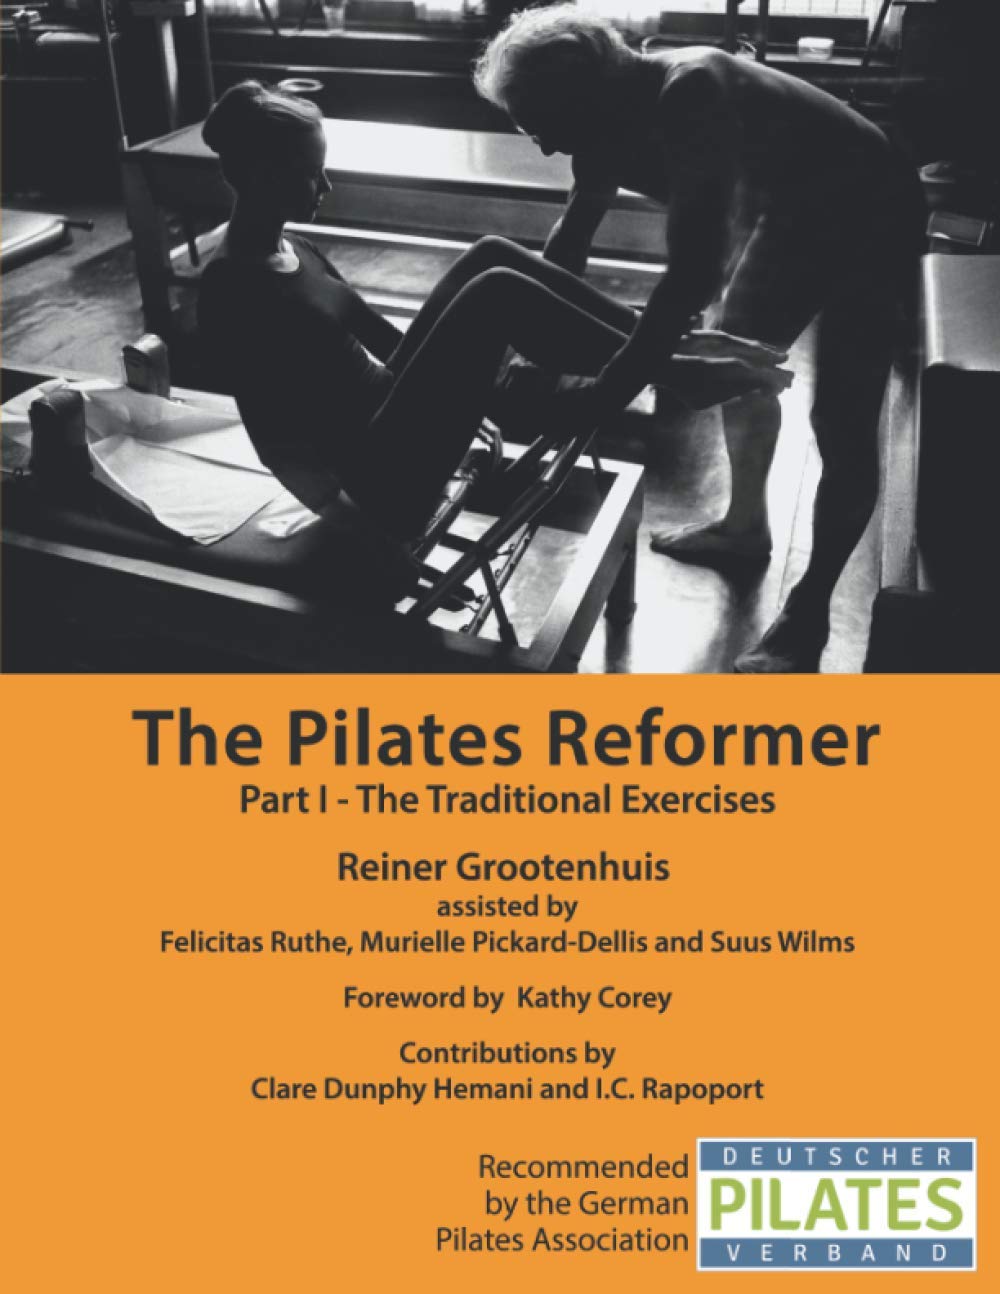 The Pilates Reformer: Part I - The Traditional Exercises